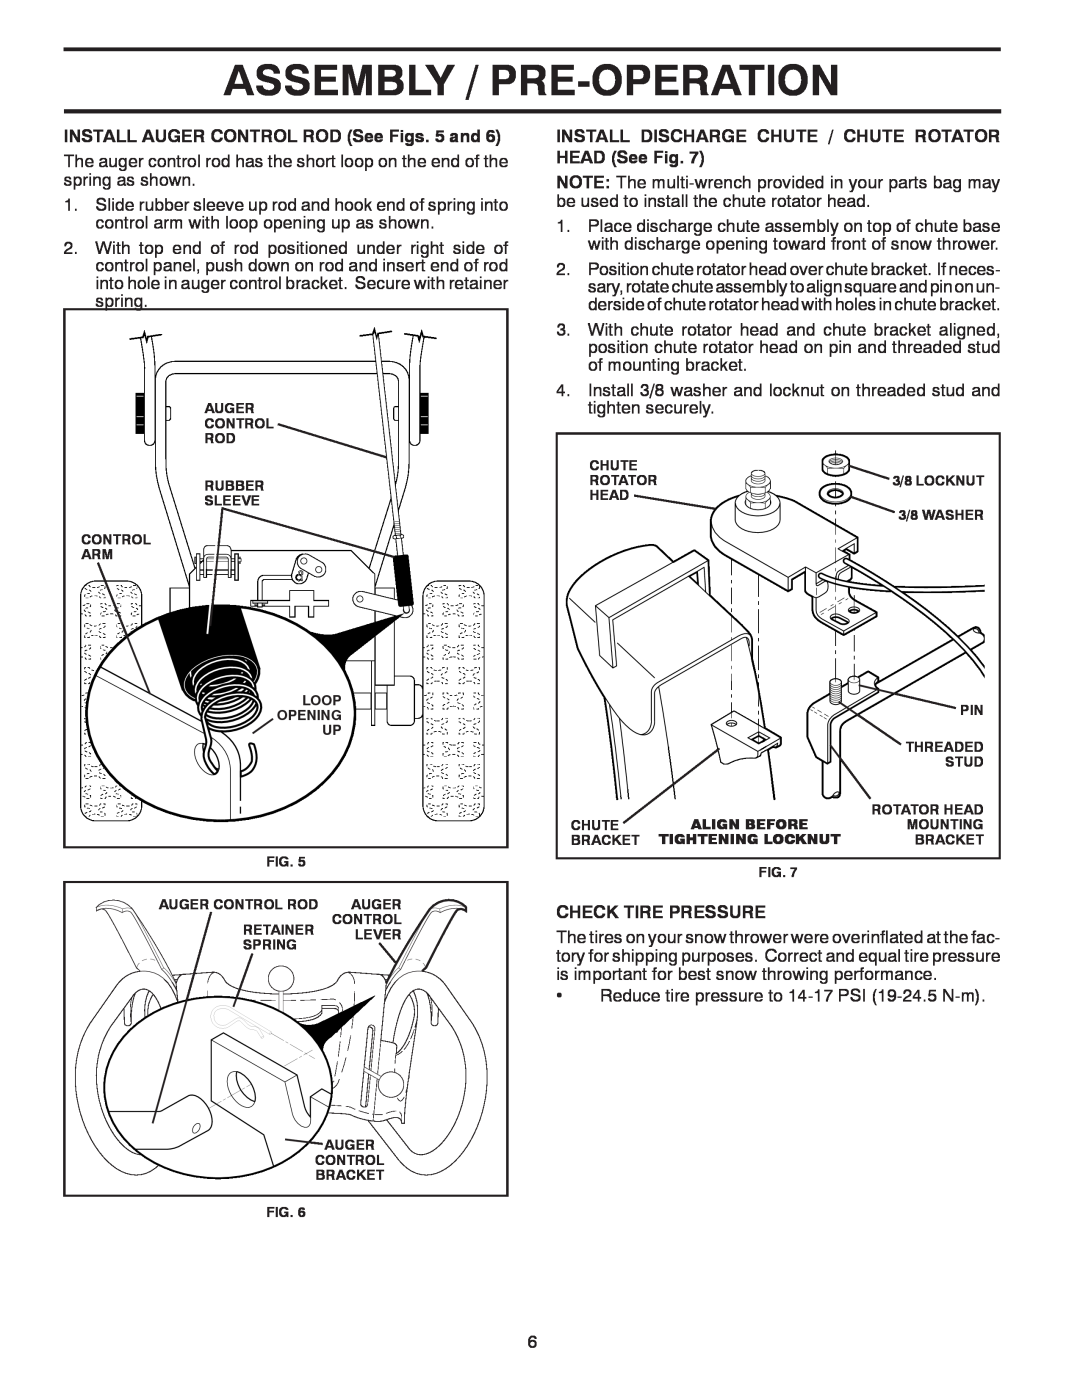 Poulan 96192001800 owner manual Assembly / Pre-Operation, INSTALL AUGER CONTROL ROD See Figs. 5 and, Check Tire Pressure 